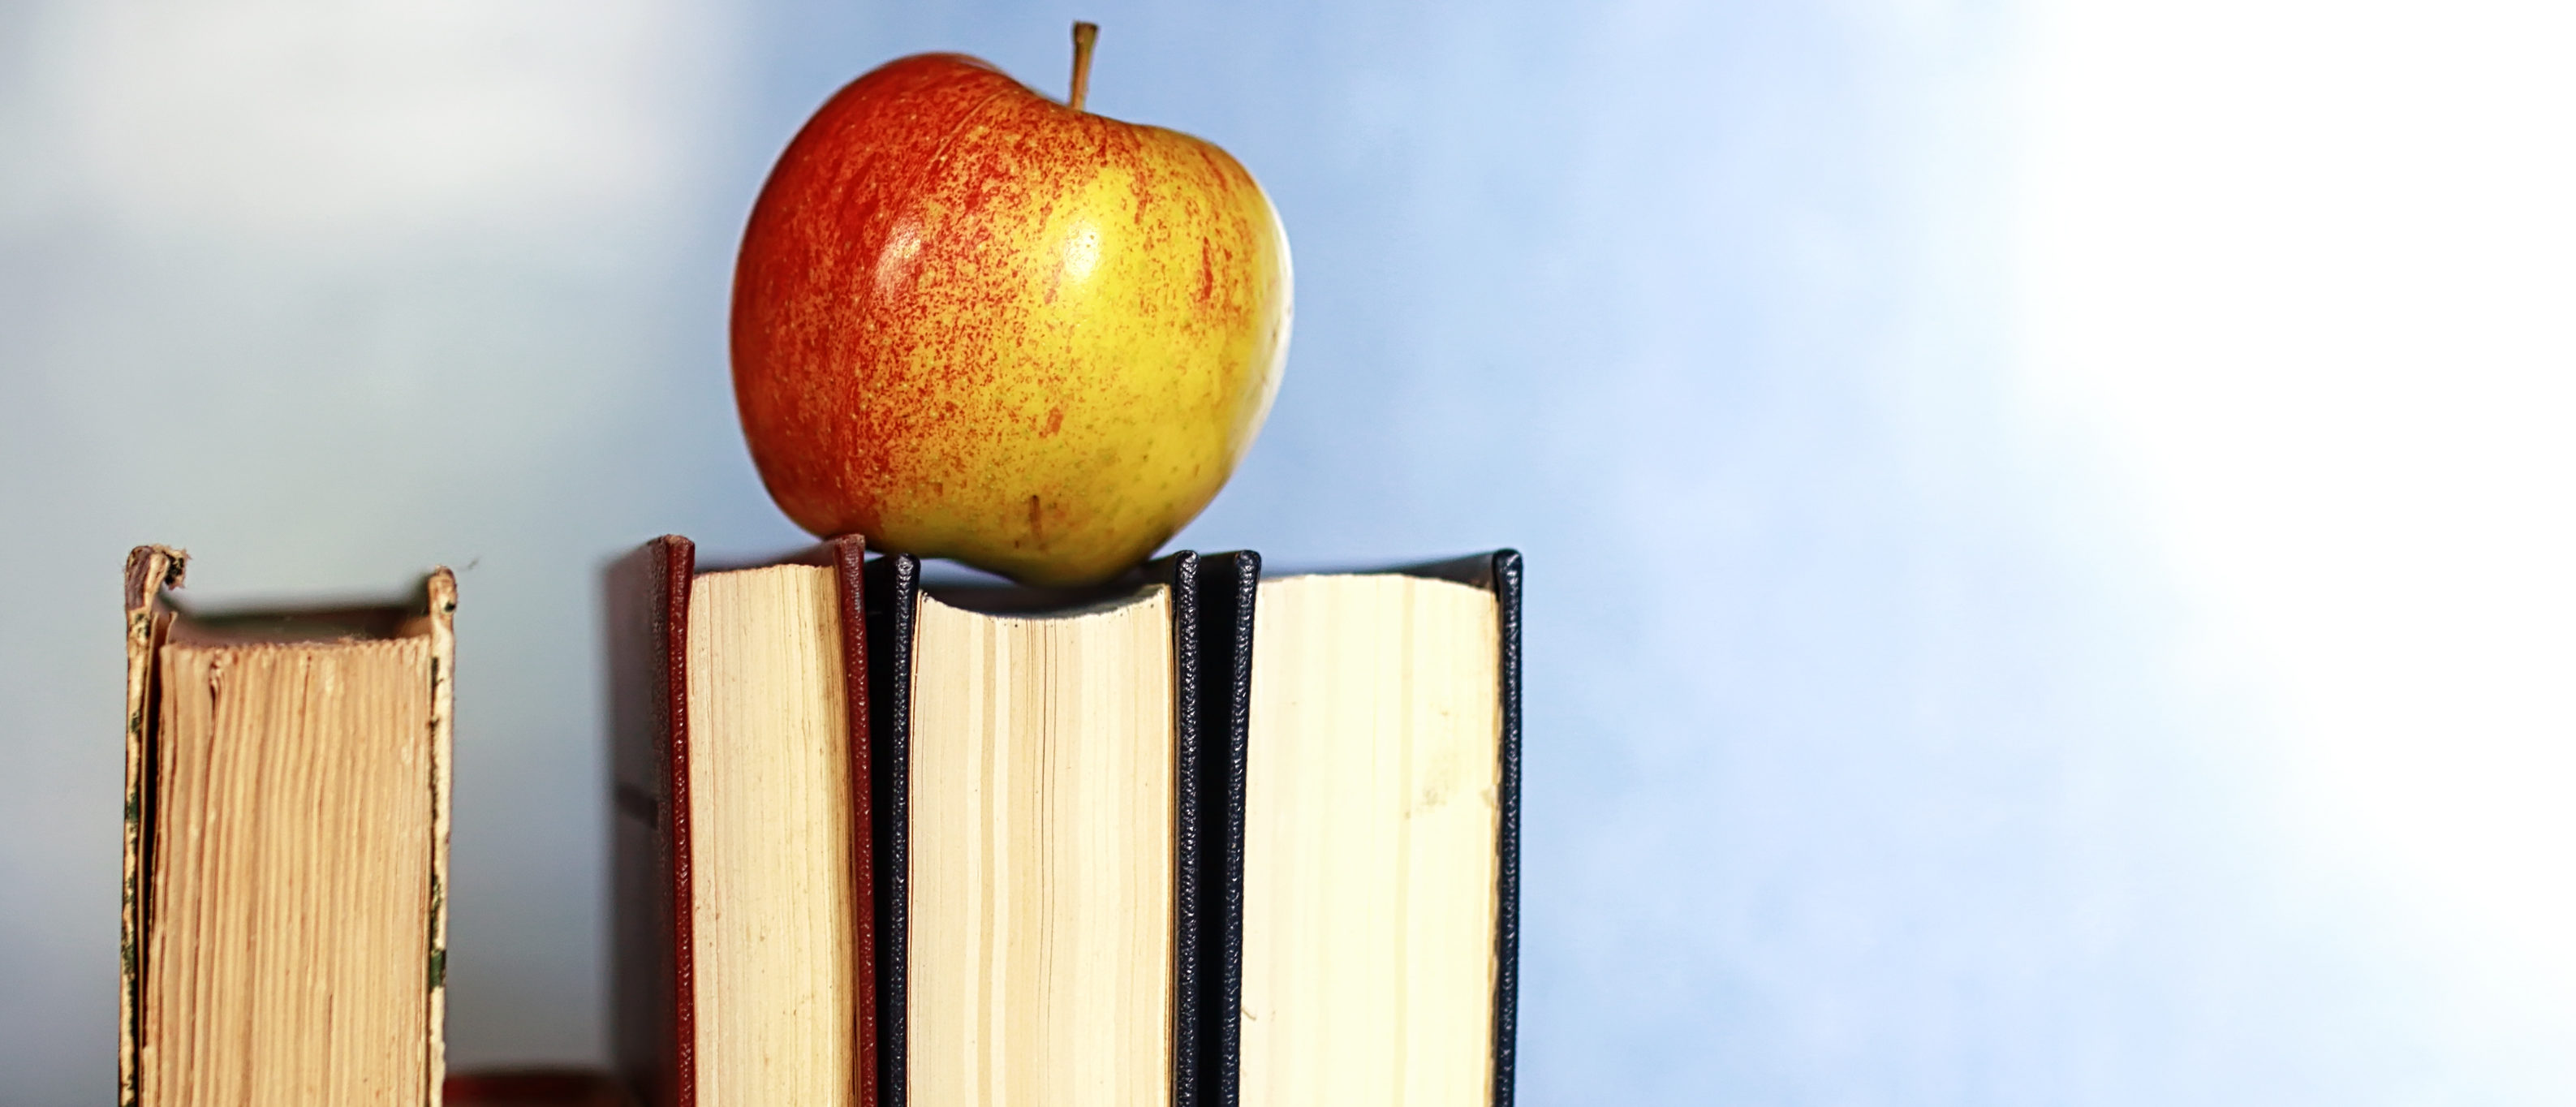 An apple on stacked books. (Shutterstock)